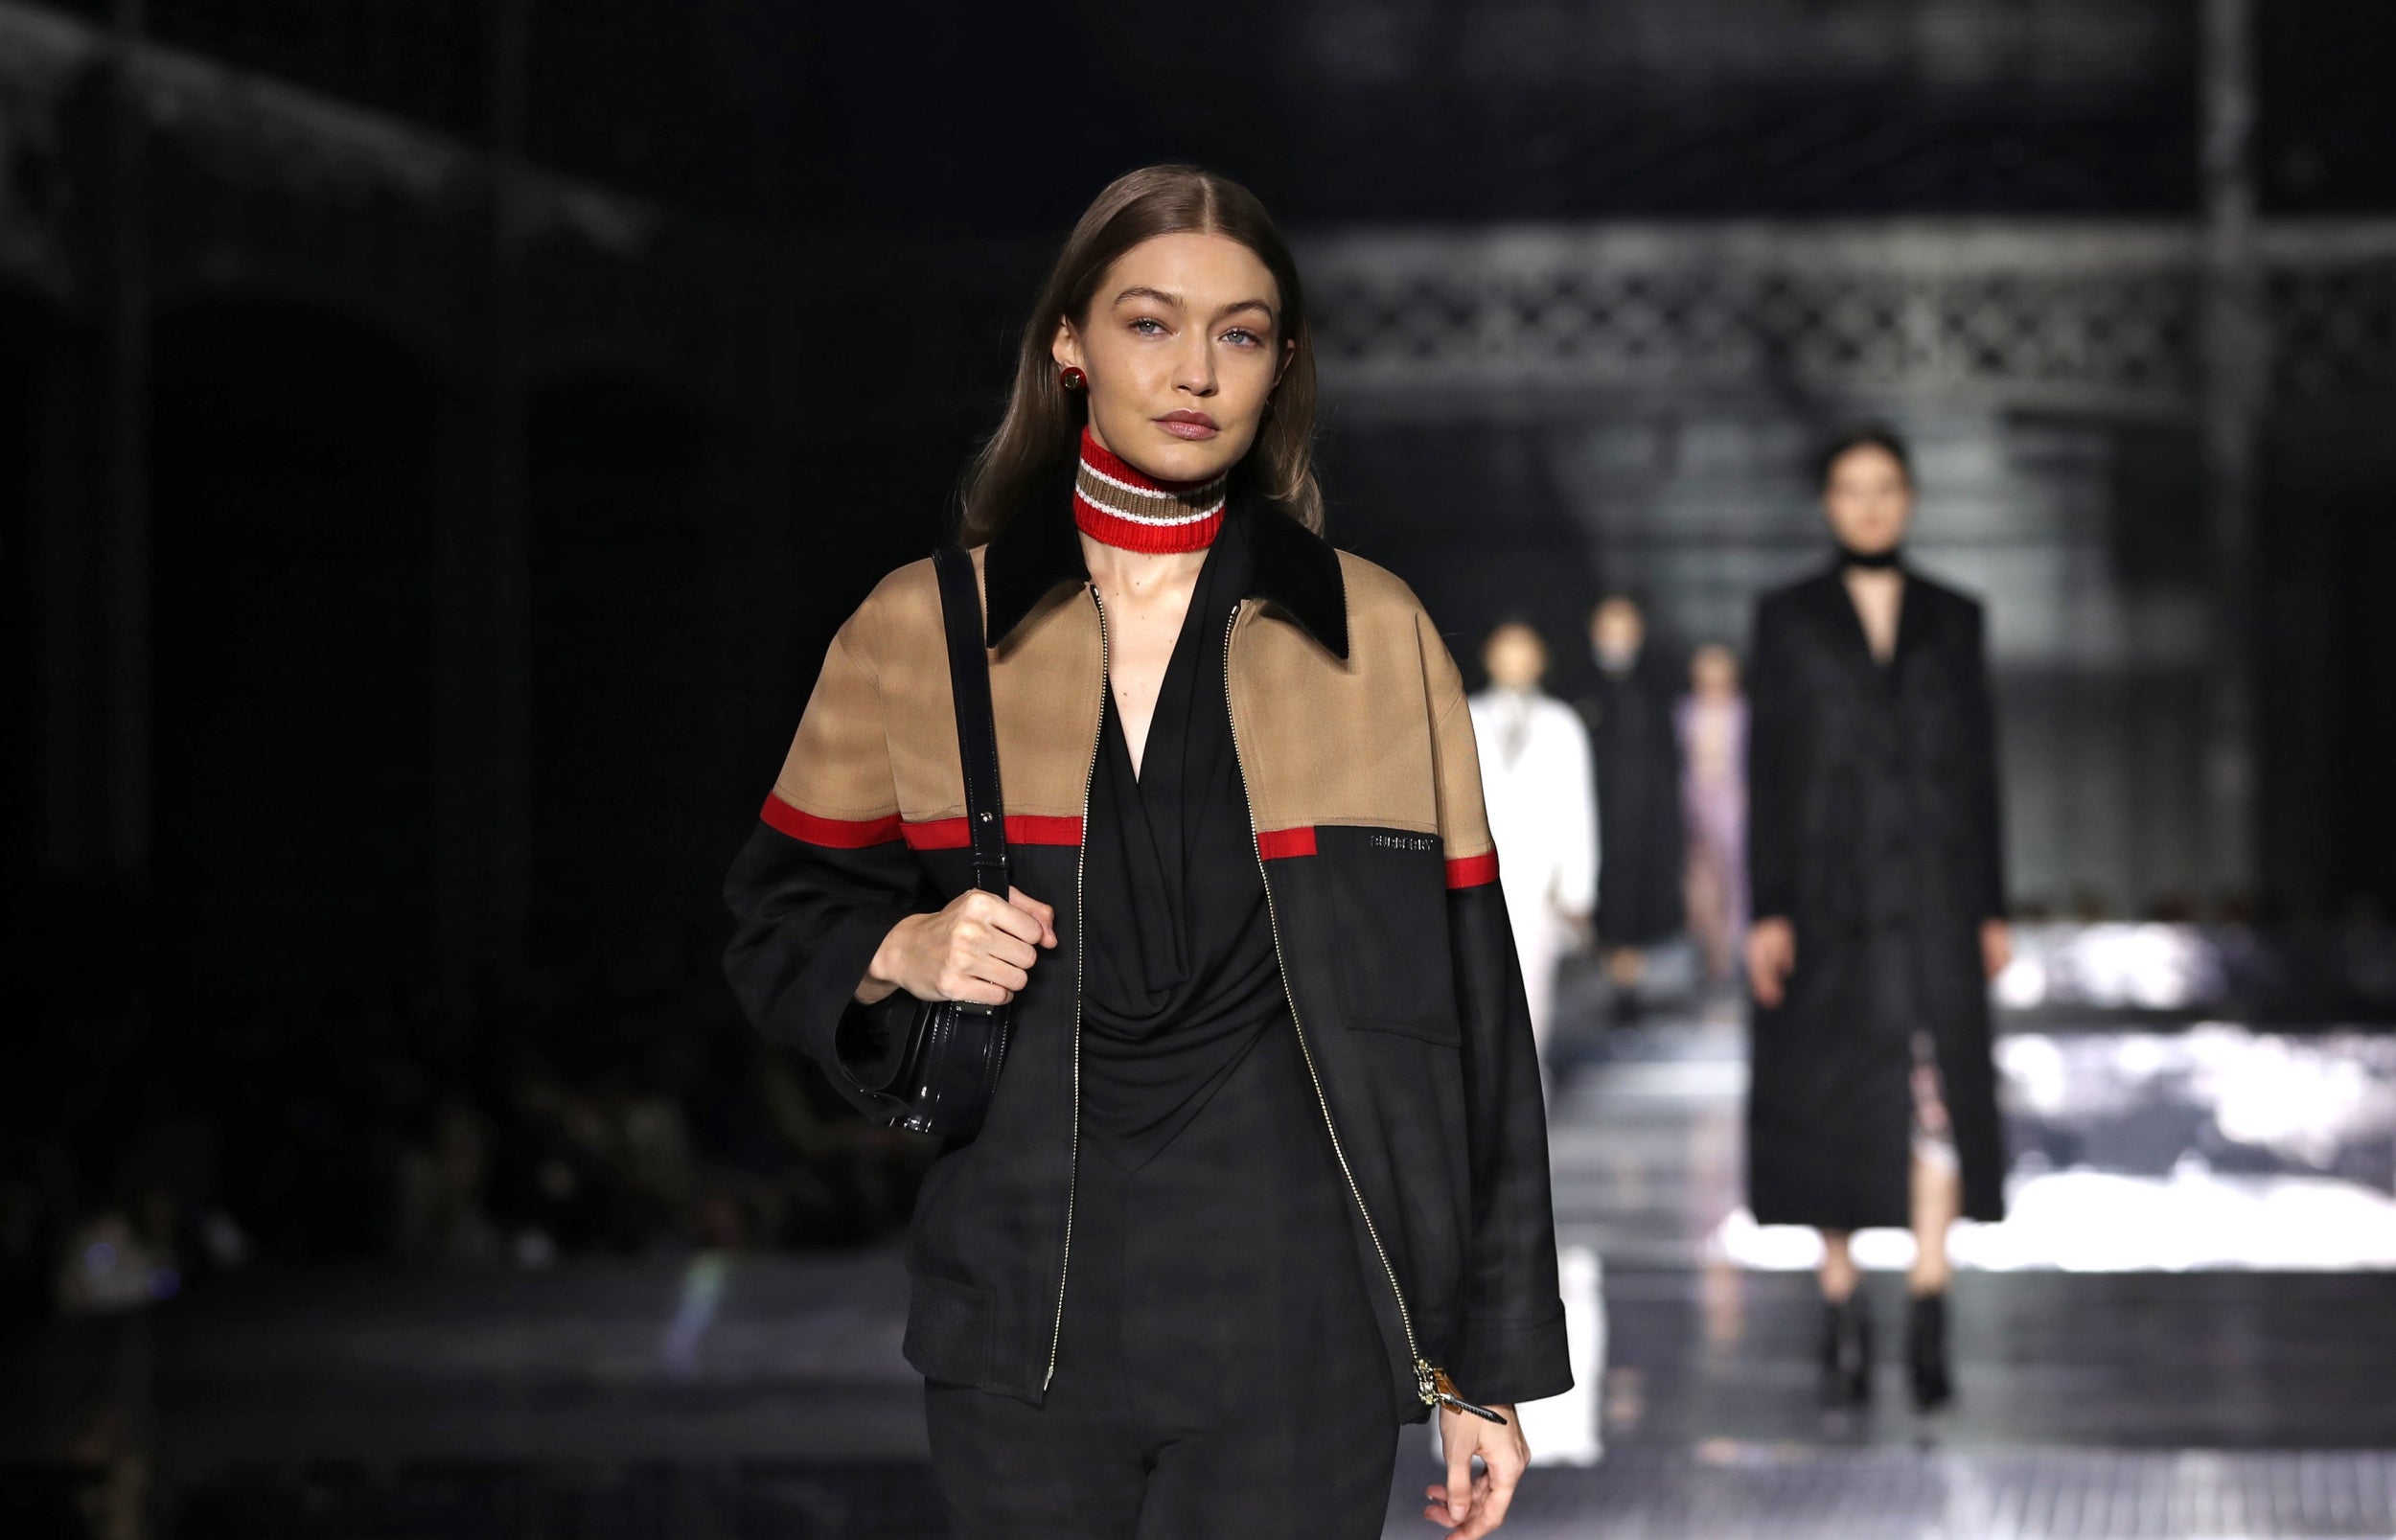 BURBERRY'S LFW SHOW WAS CARBON-NEUTRAL, COMPANY TAKES FURTHER ECO MEASURES